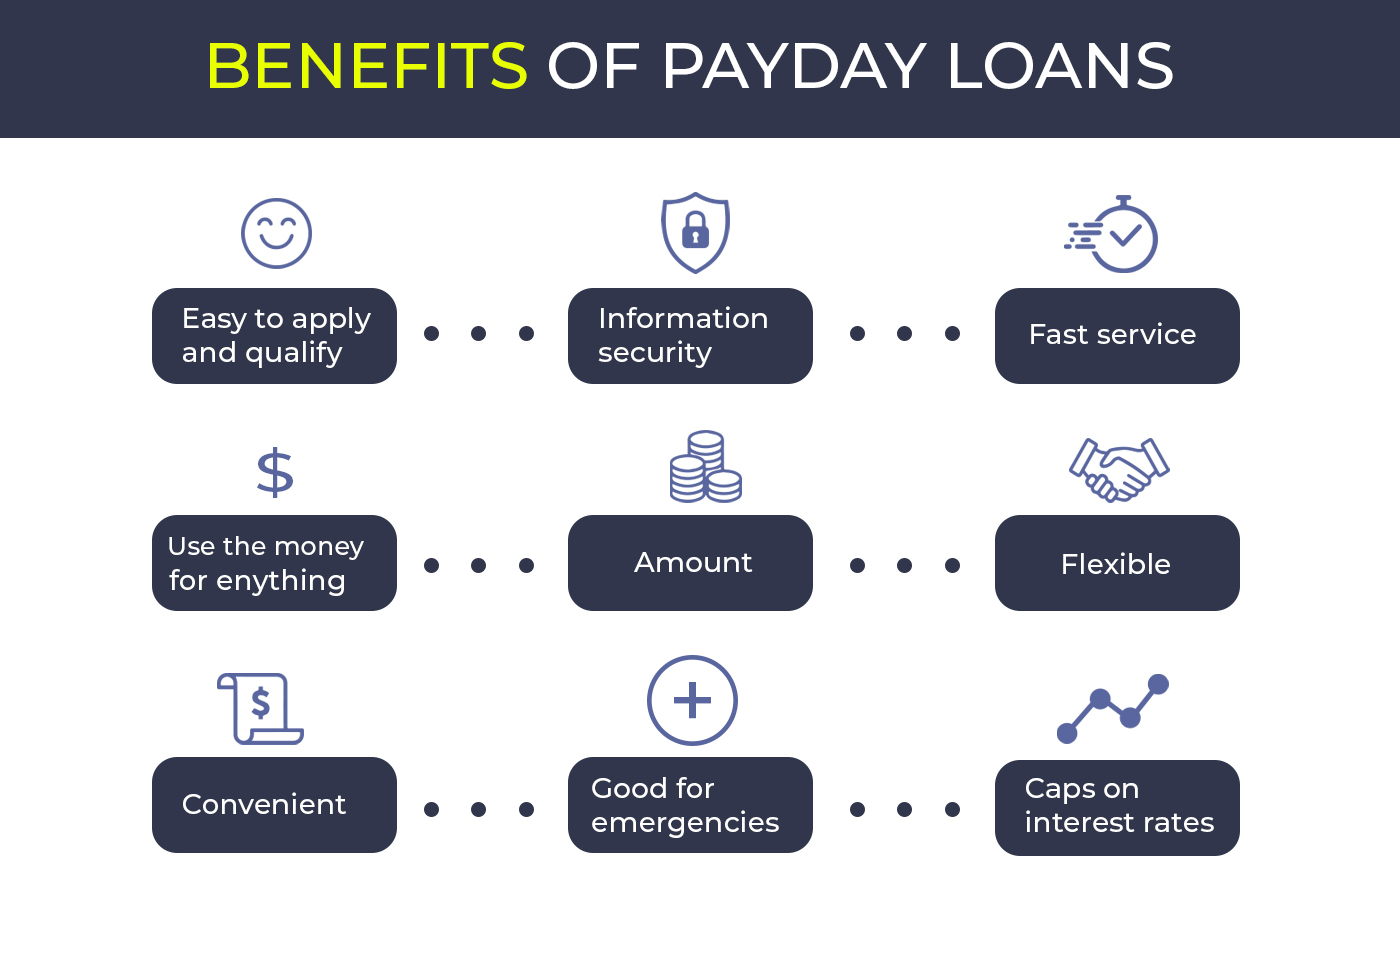 How to Choose the Right Payday Loan Provider?